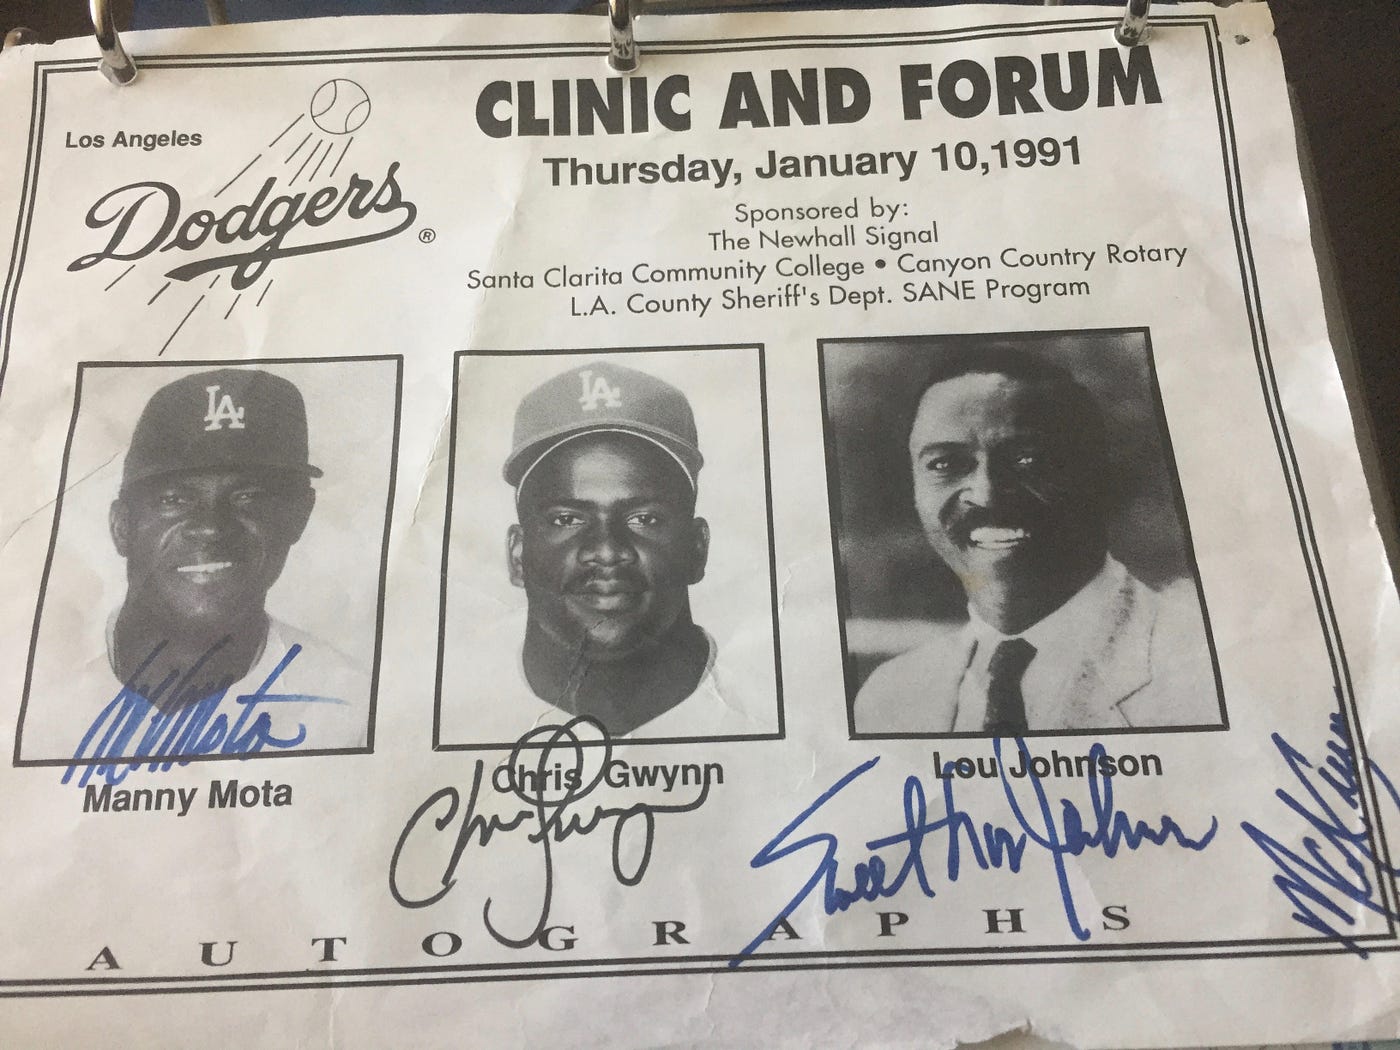 A pinch of history accents Manny Mota's legendary career, by Mark Langill